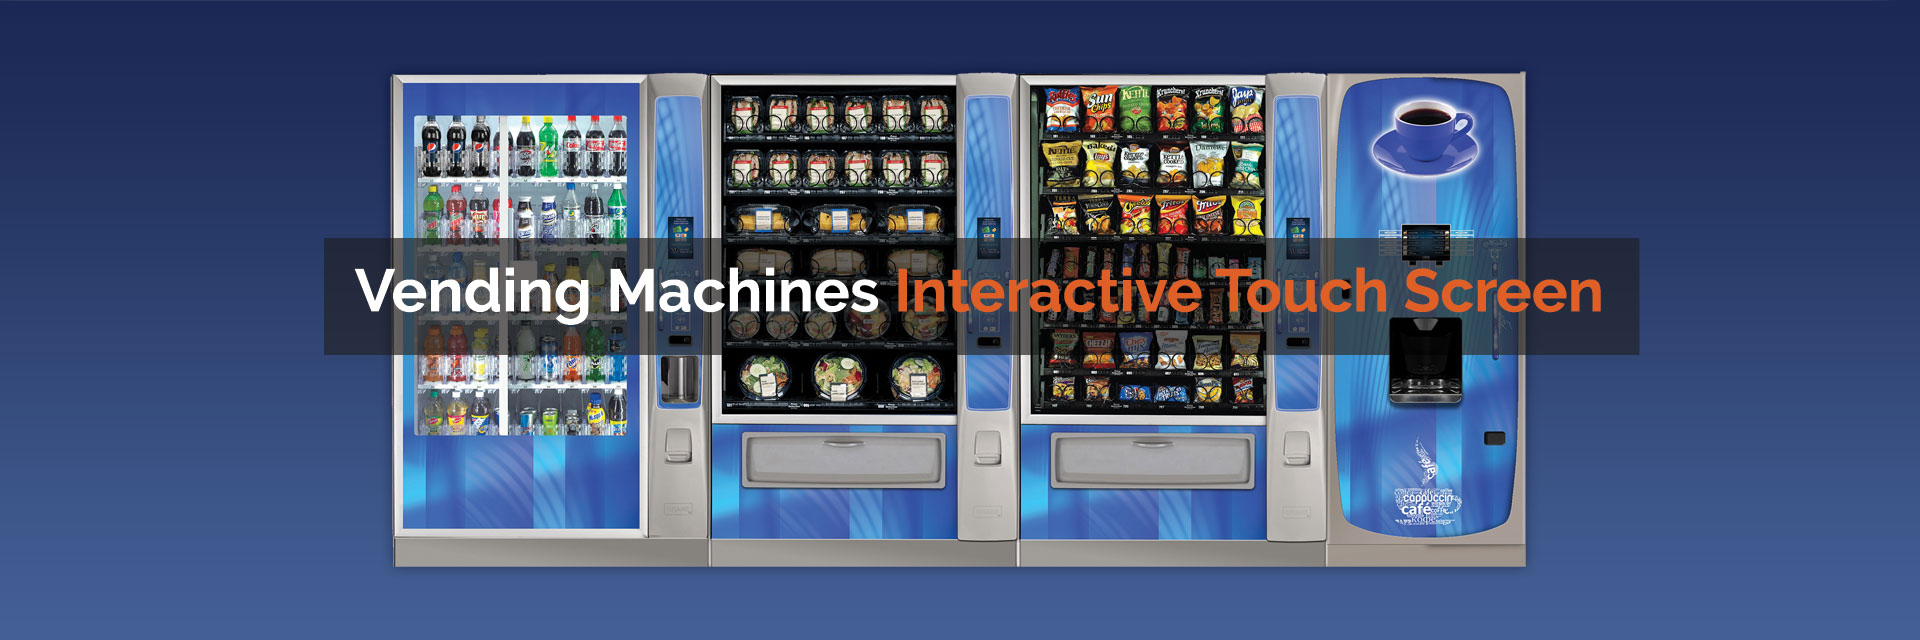 Vending Machines Interactive Touch Screen